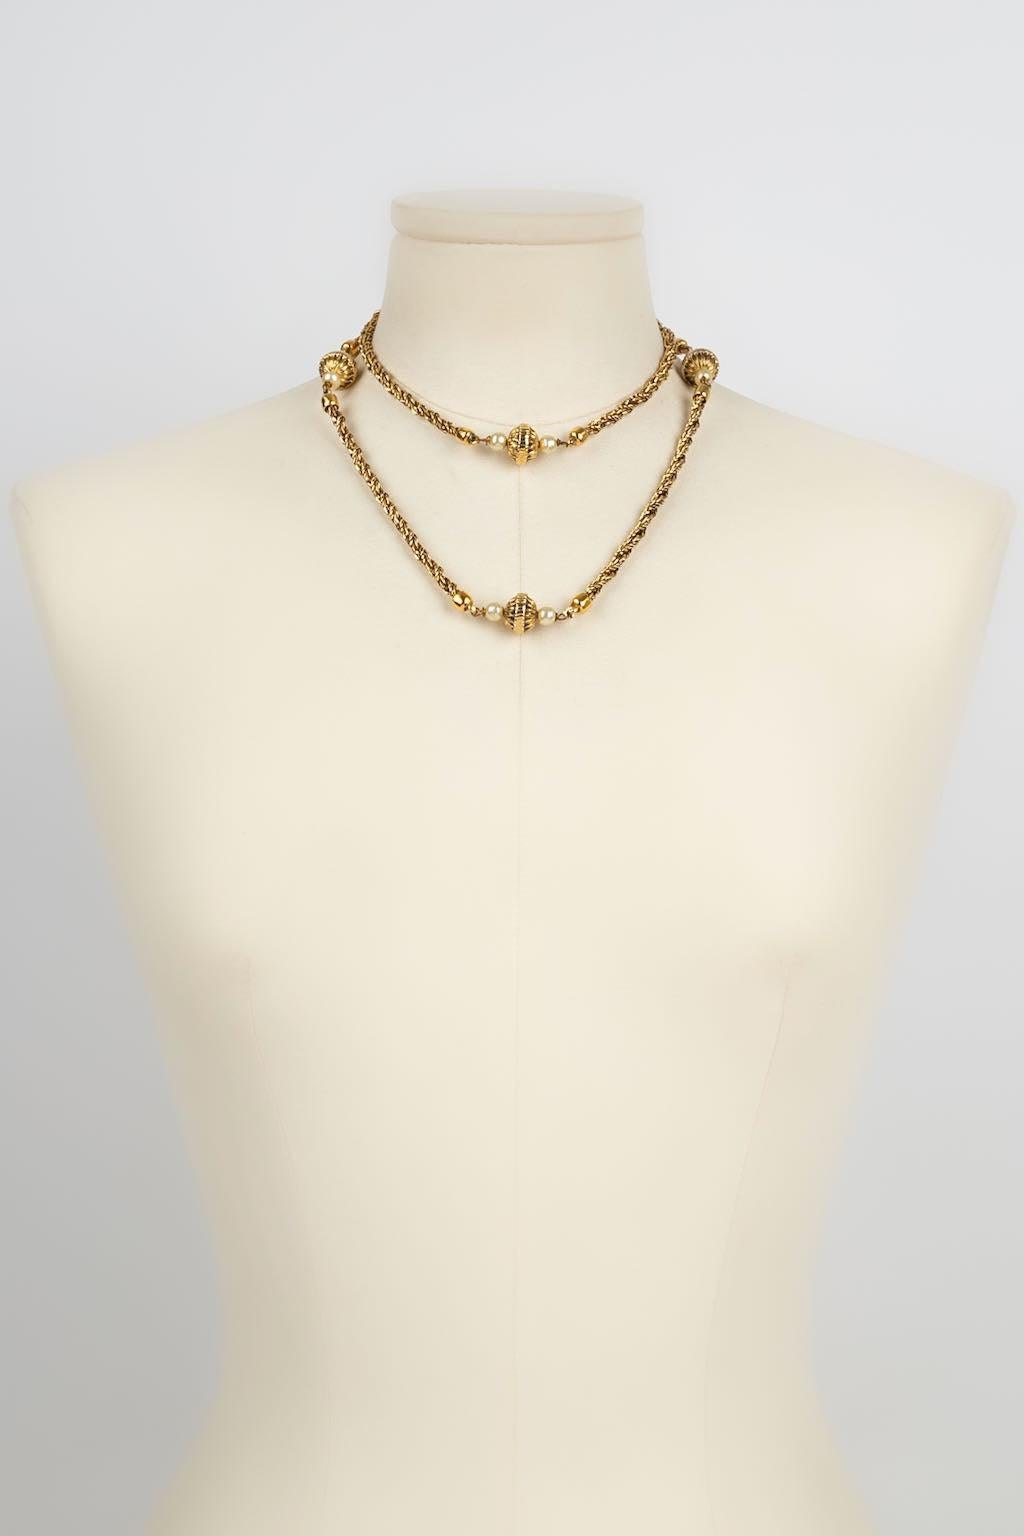 Chanel Long Necklace in Gilded Metal with Pearly Pearls In Excellent Condition For Sale In SAINT-OUEN-SUR-SEINE, FR